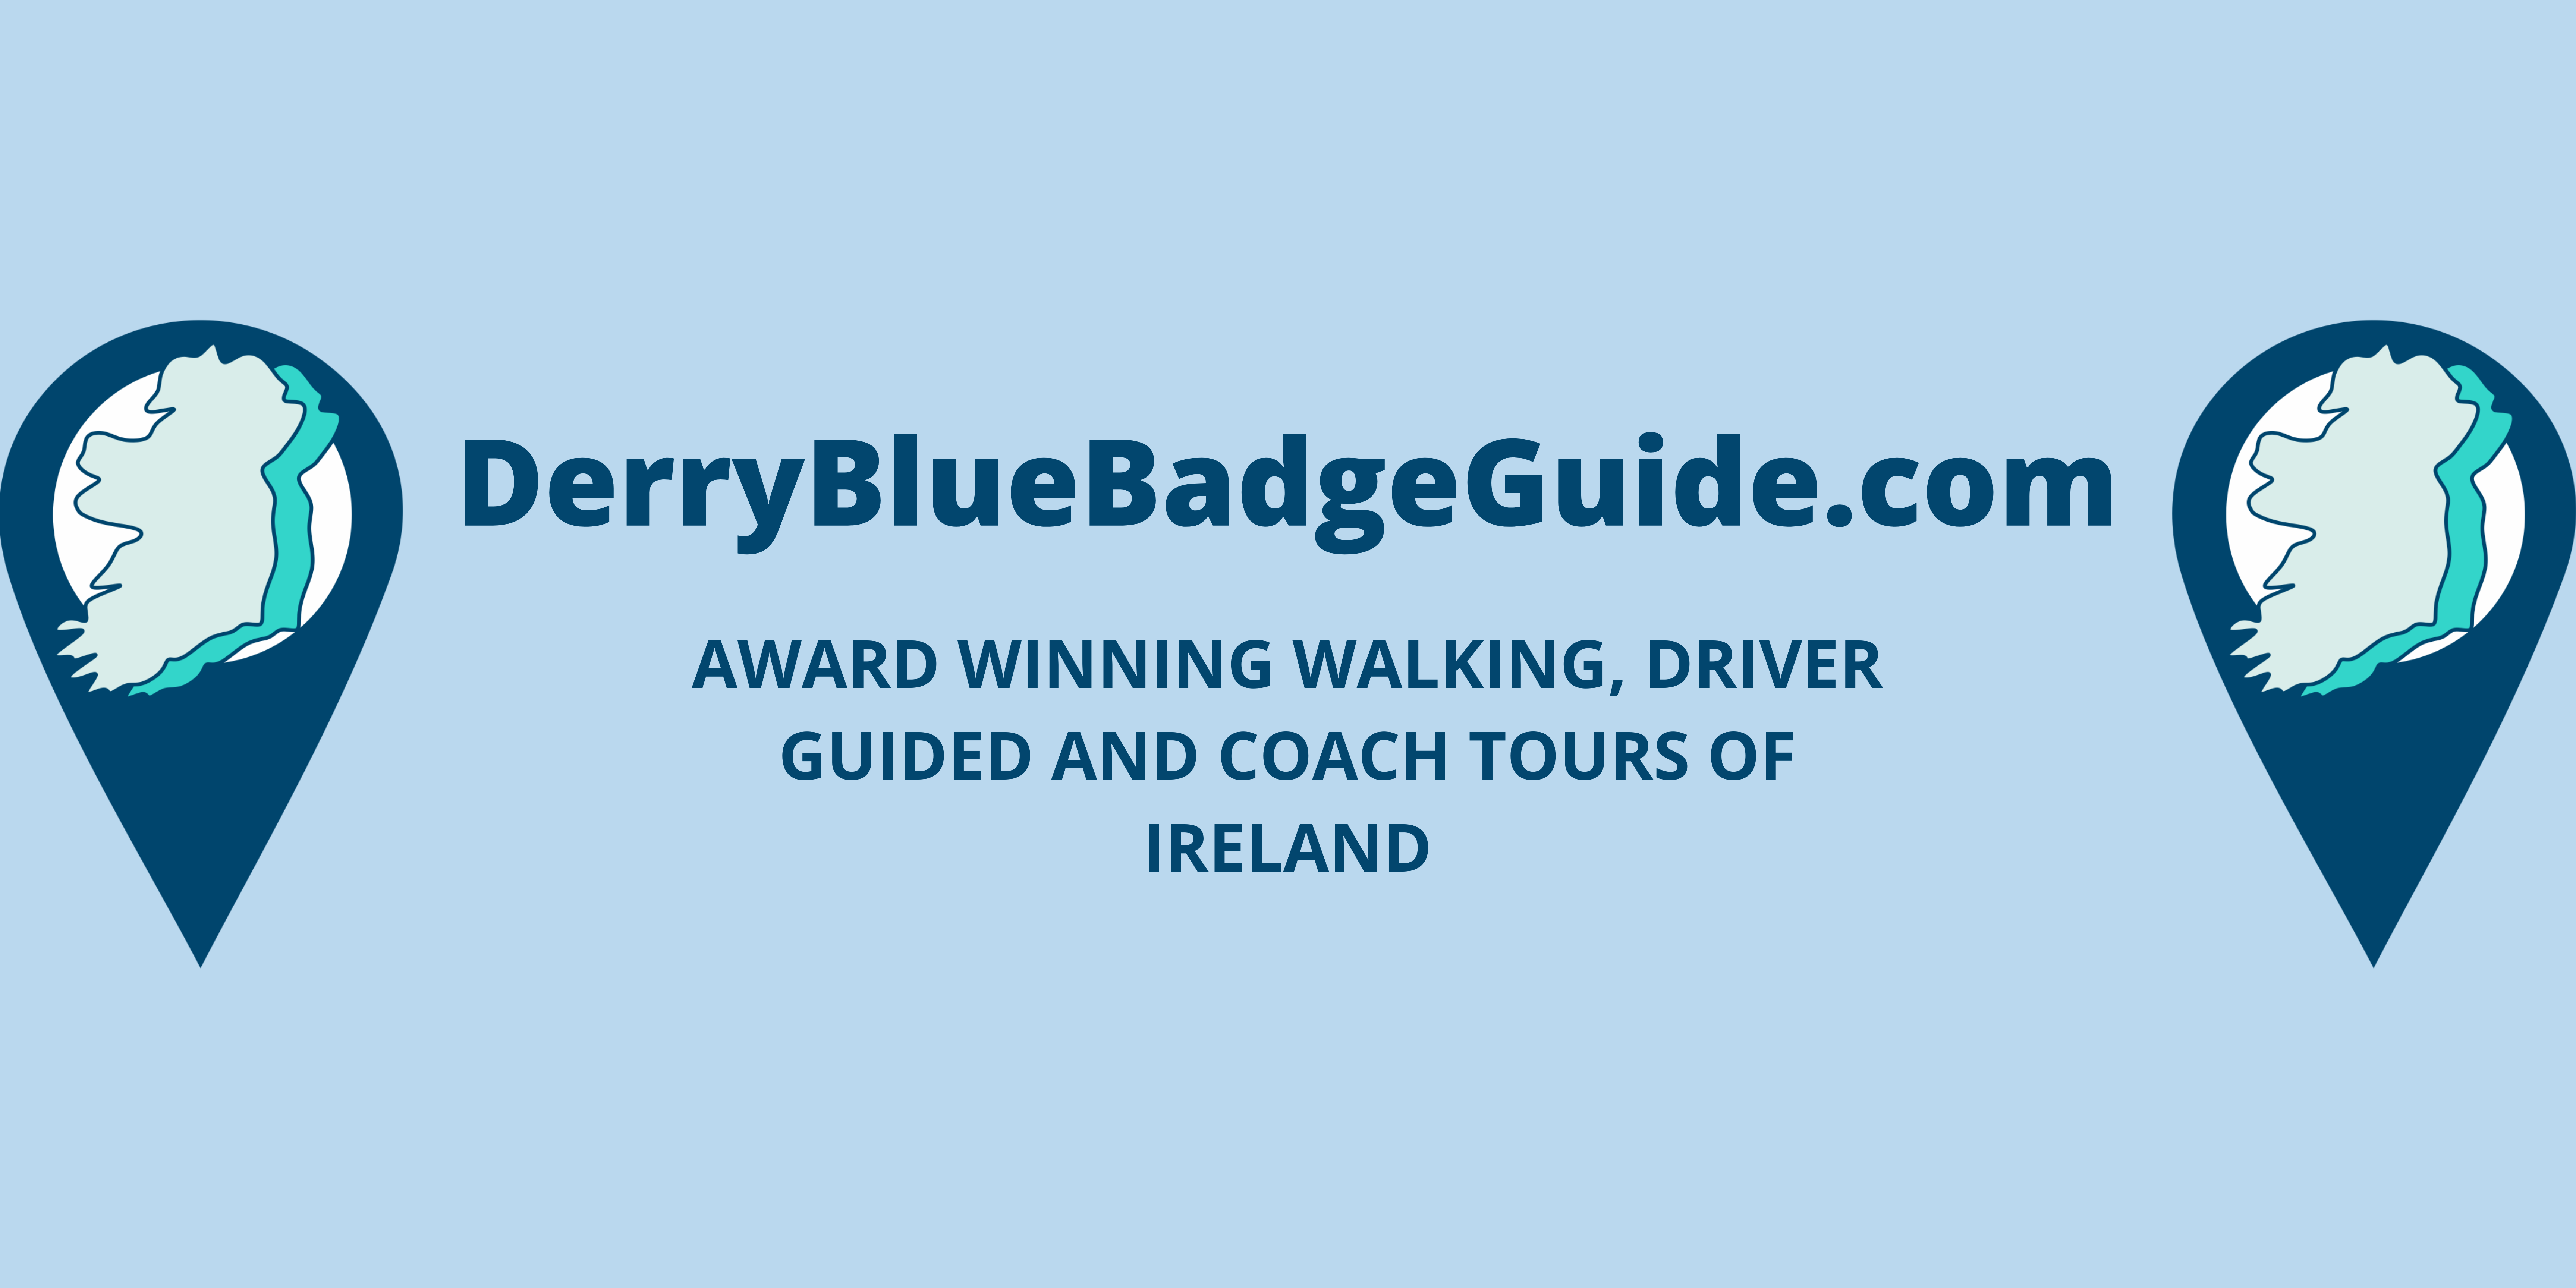 Derry Blue Badge Guide